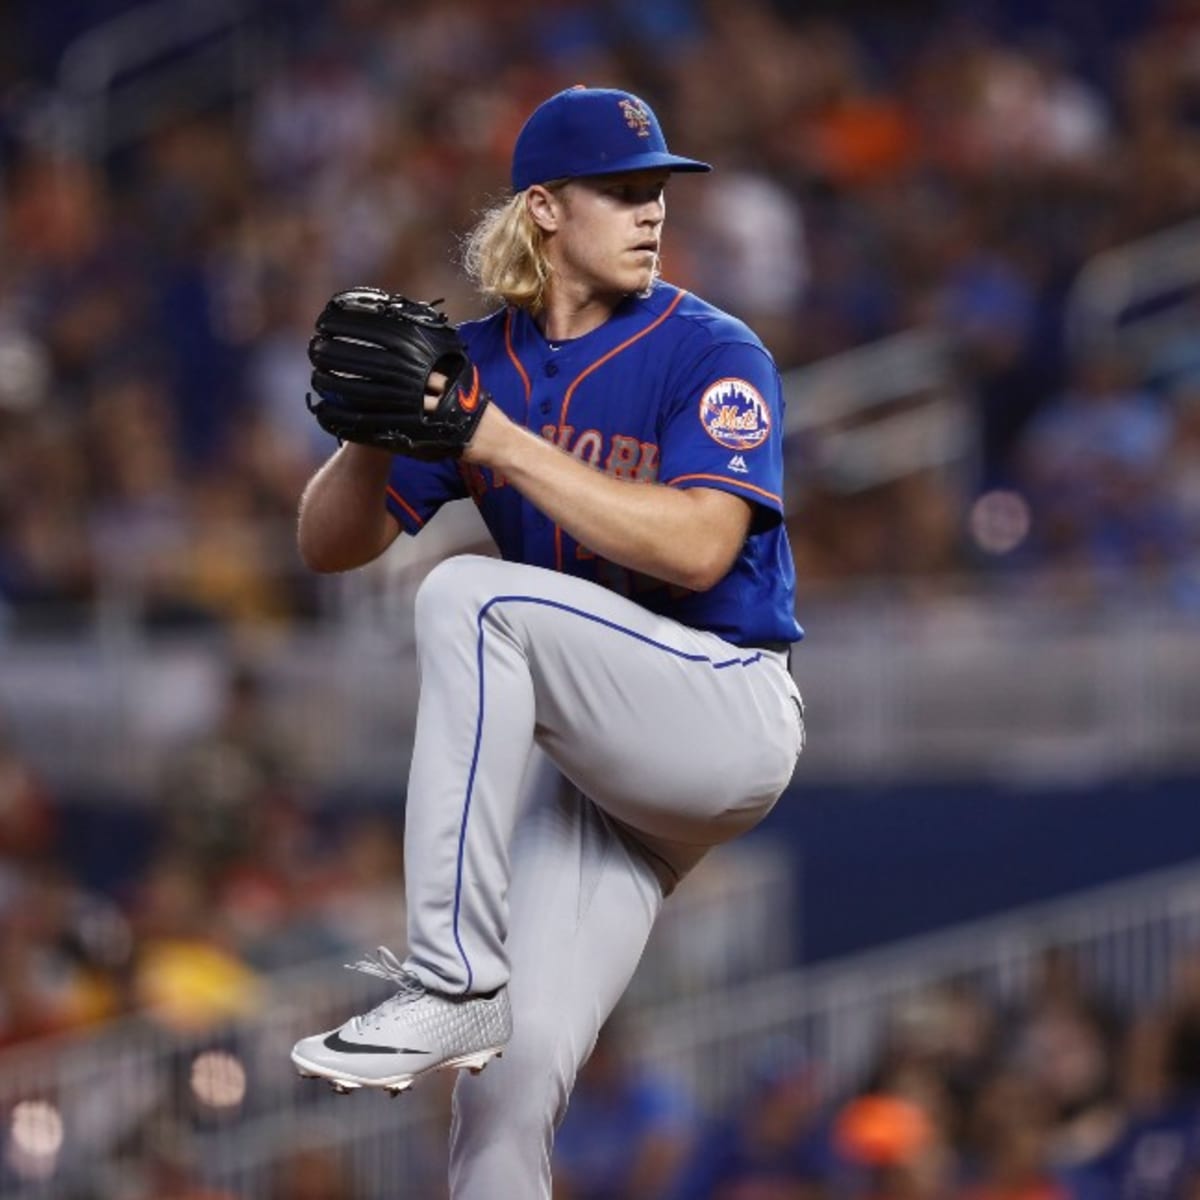 Mets pitchers have gotten big results by focusing on little things